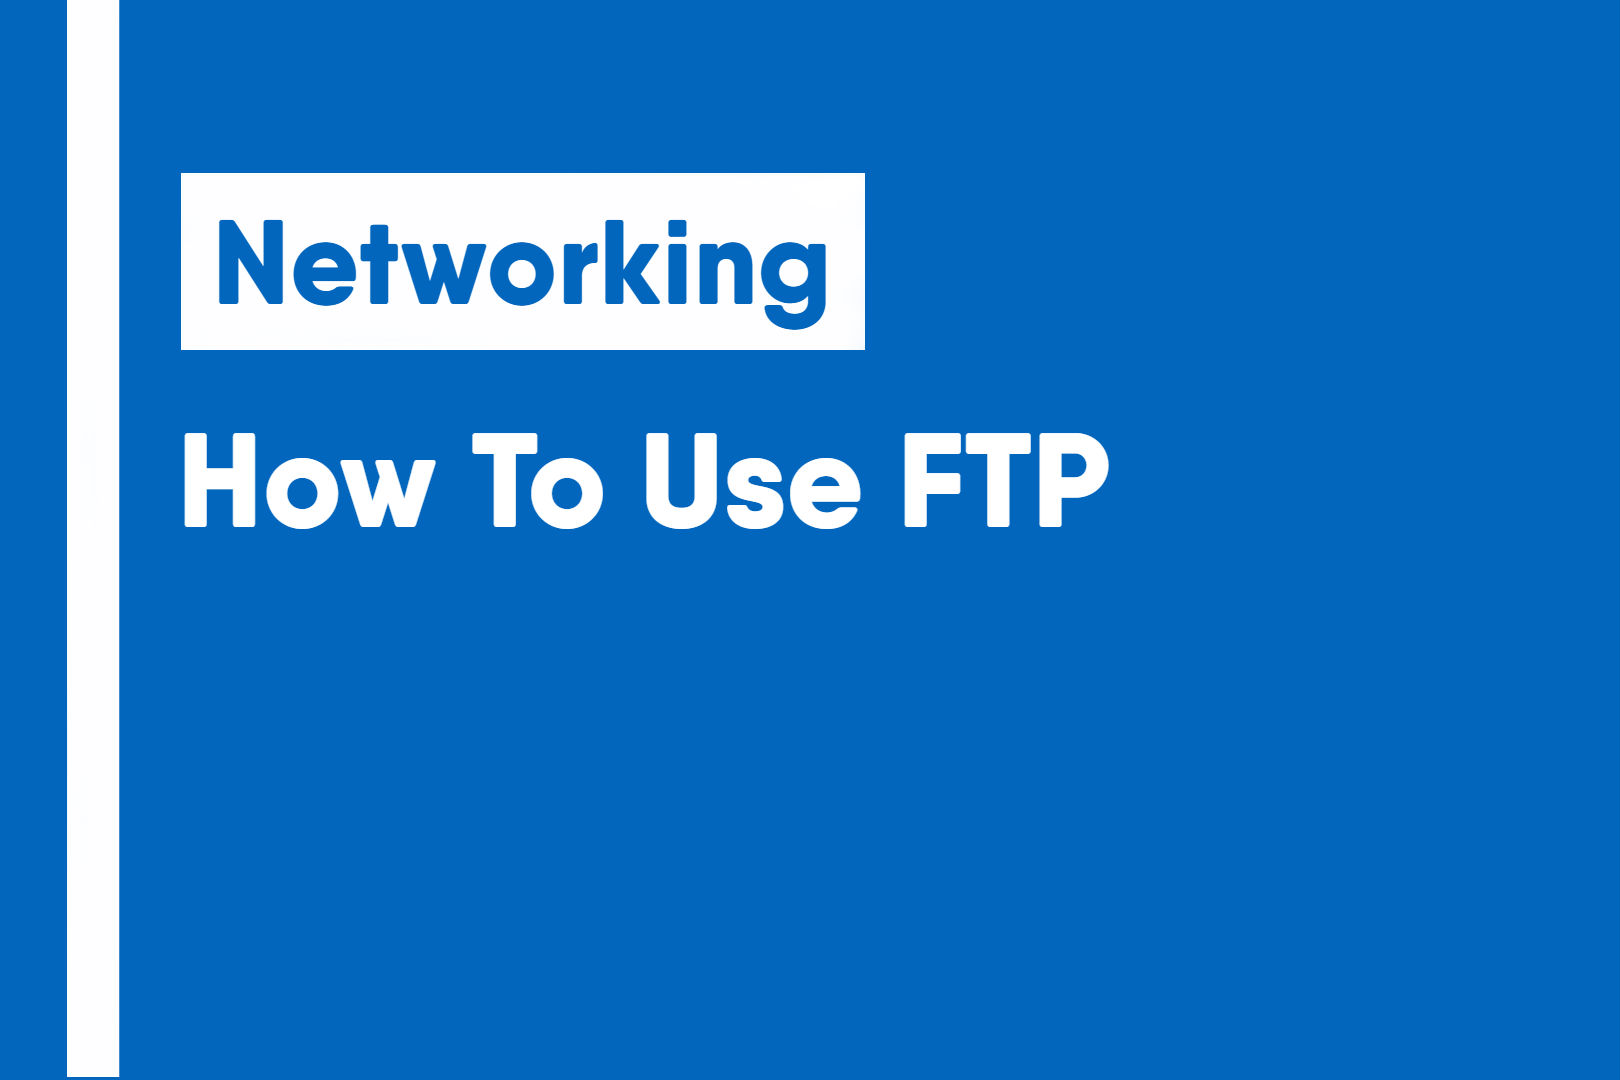 How To Use FTP